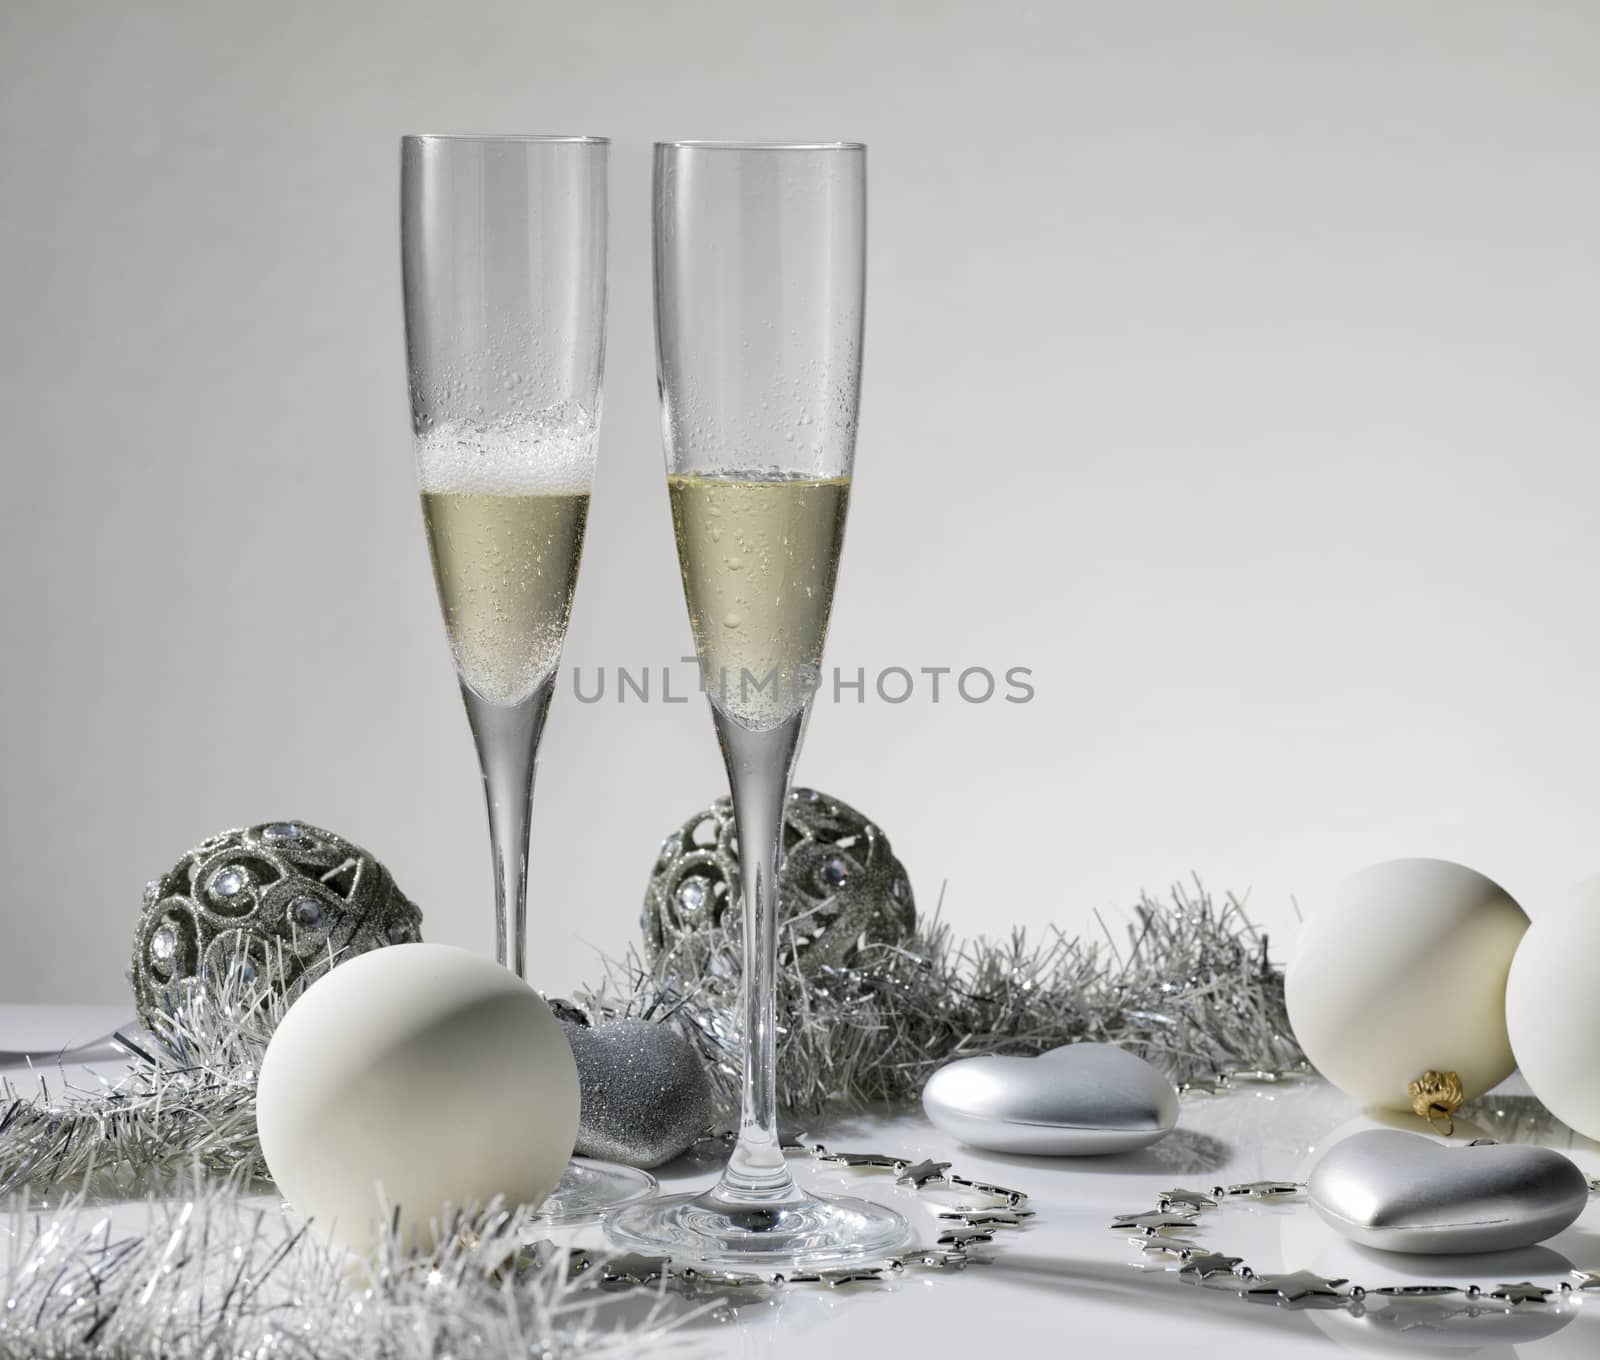 Champagne glasses ready to bring in the New Year by janssenkruseproductions